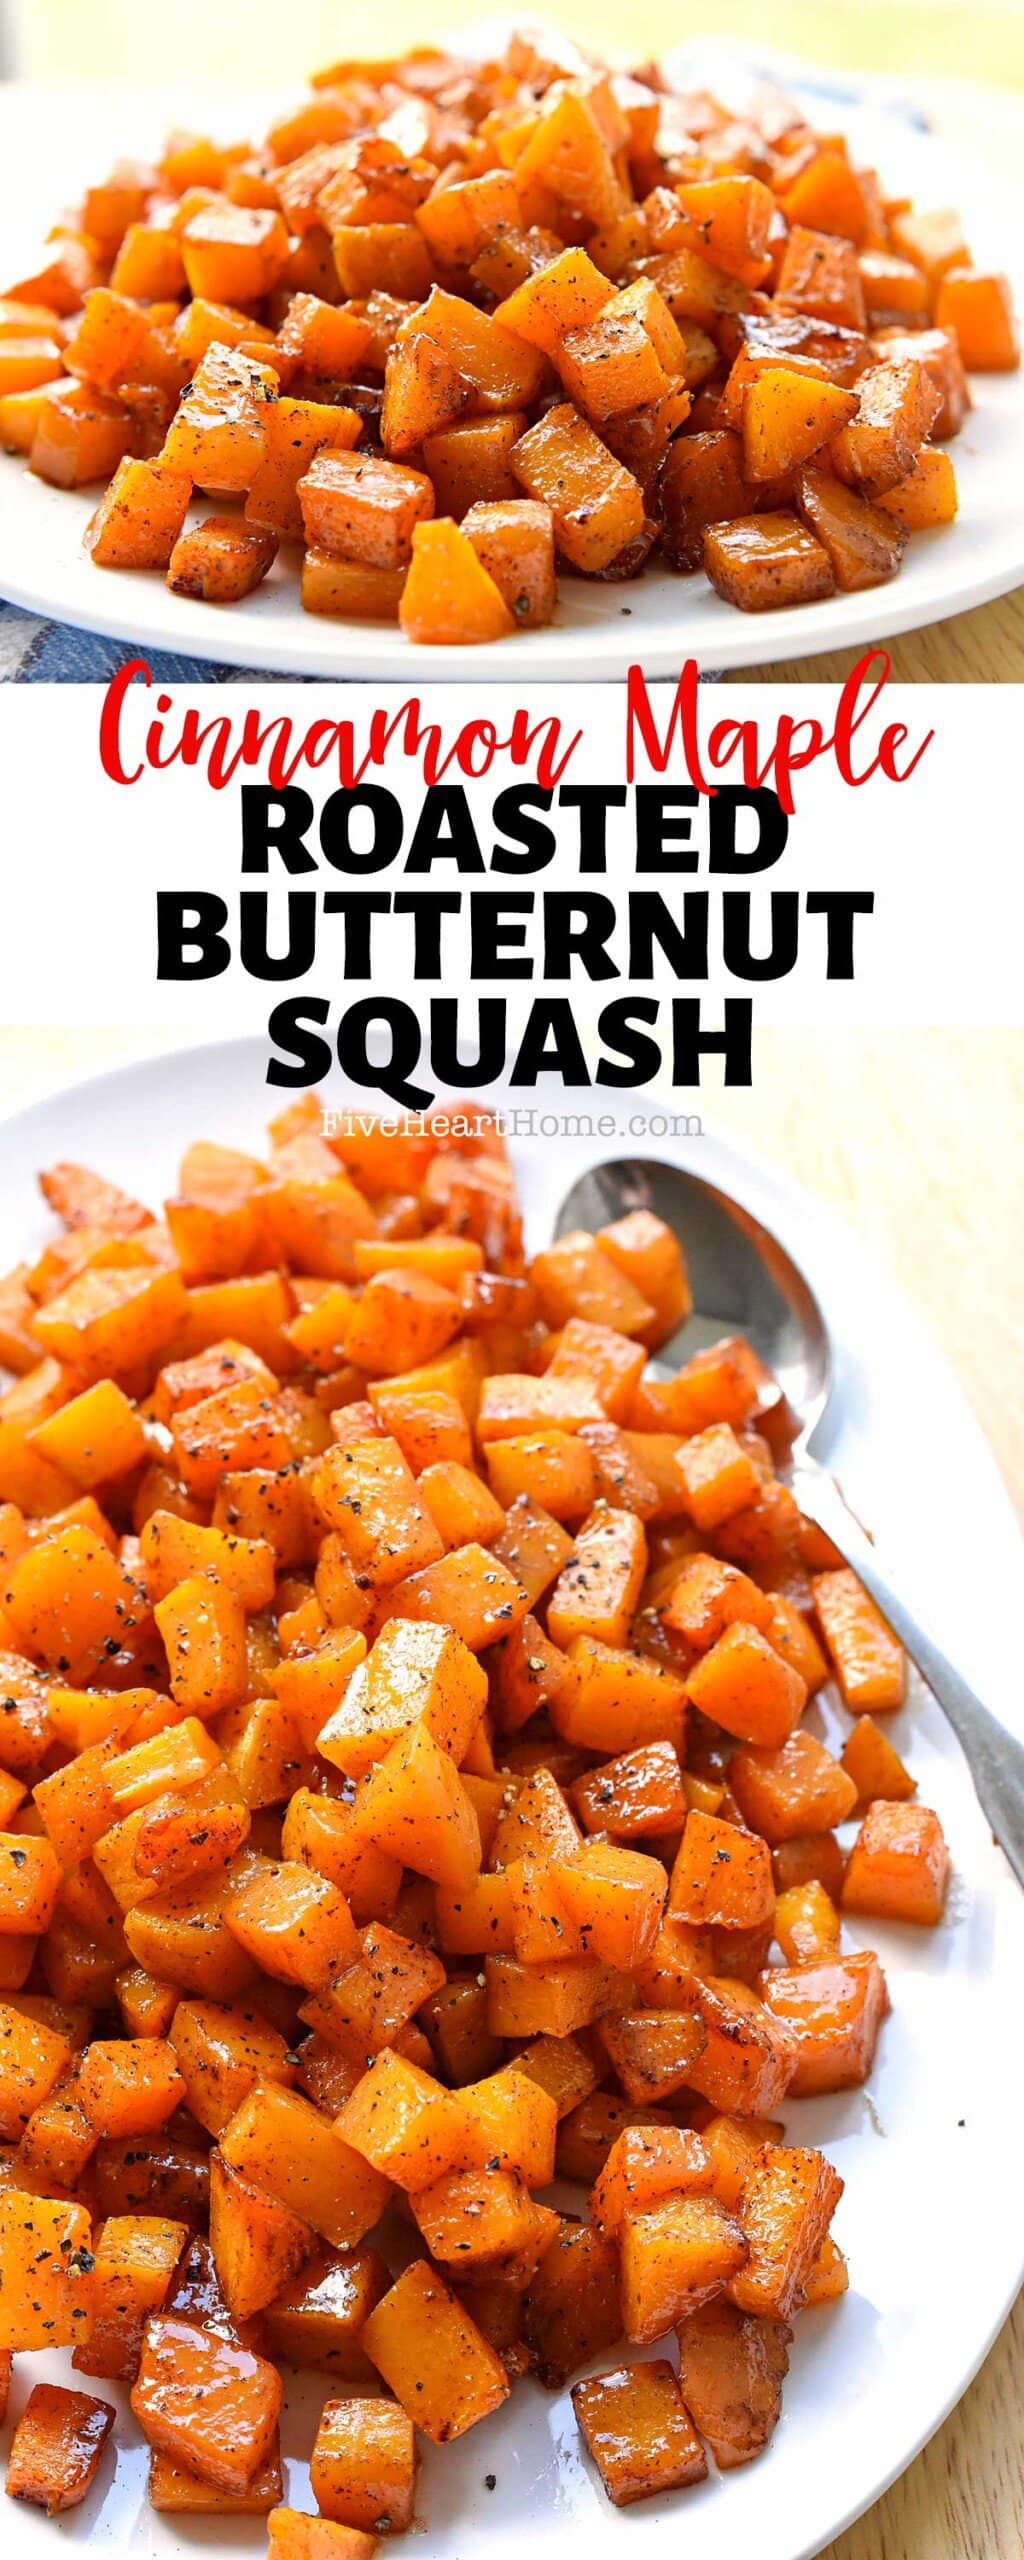 Roasted Butternut Squash with Cinnamon + Maple is a sweet and savory recipe of tender roasted squash coated with coconut oil, maple syrup, and cinnamon for a gorgeous, golden fall or winter side dish! | FiveHeartHome.com via @fivehearthome